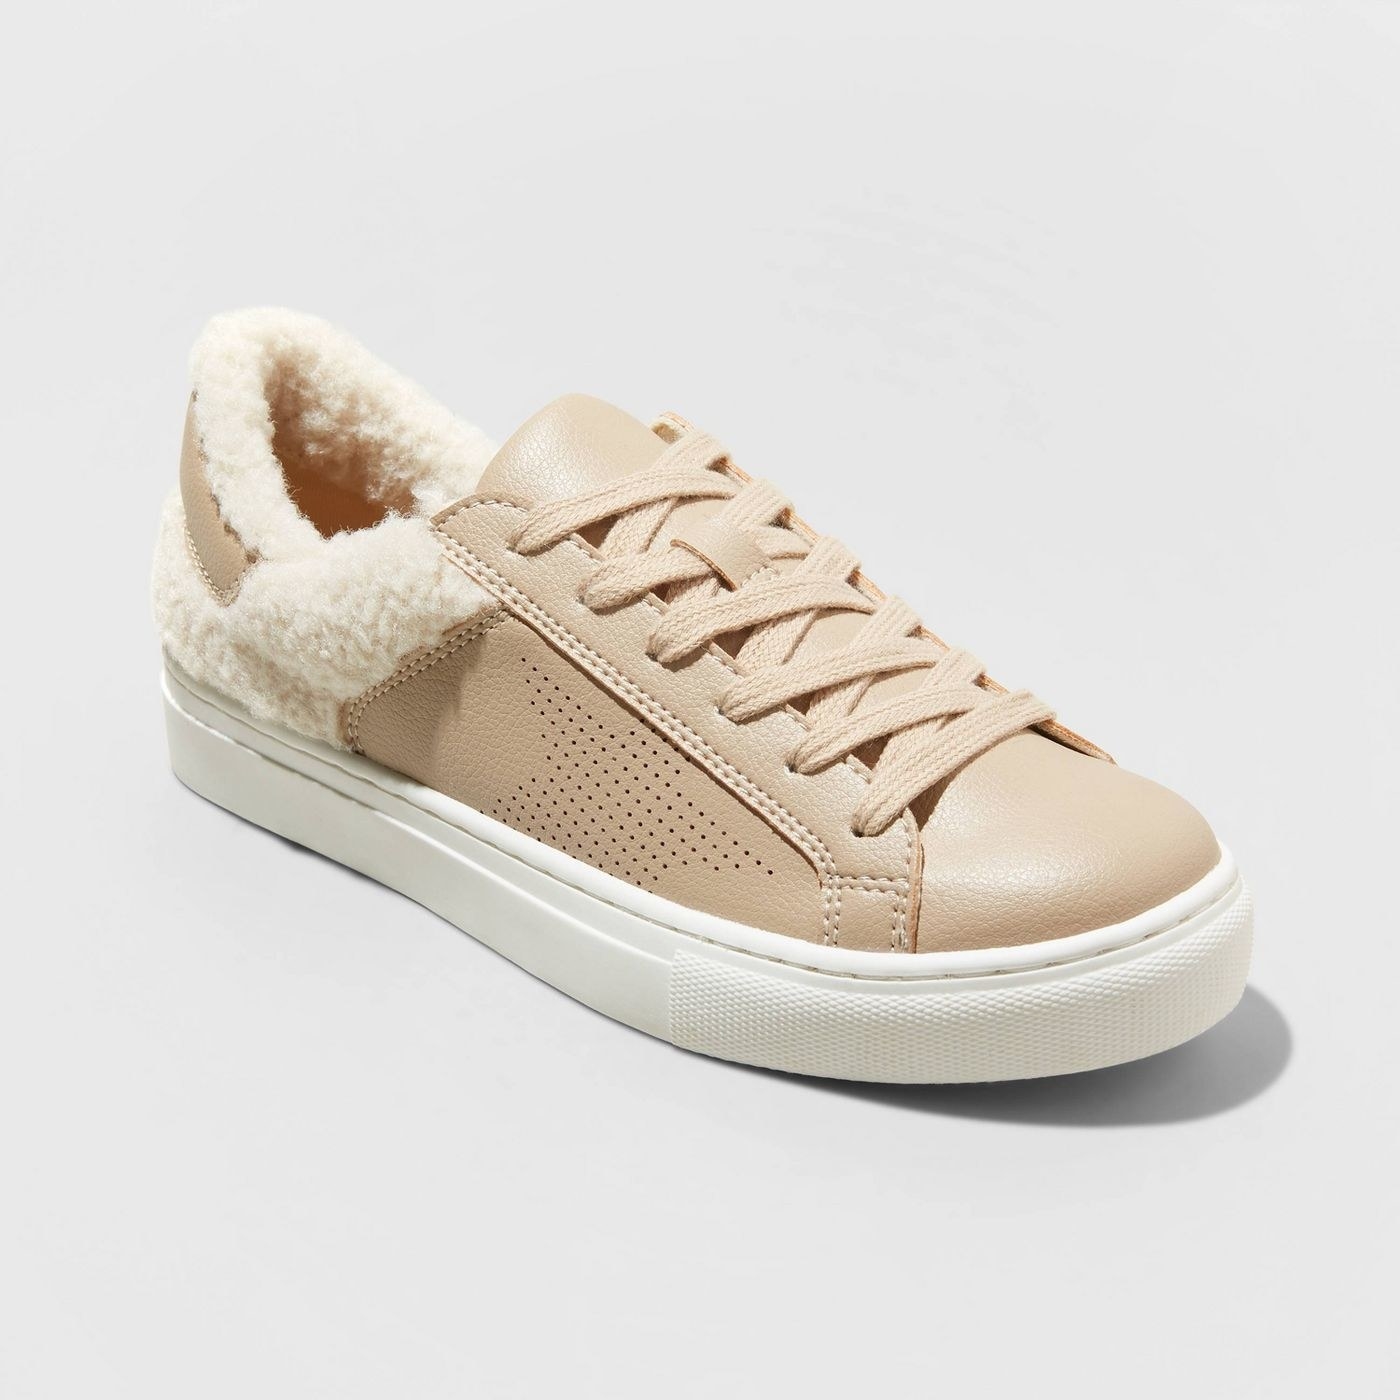 The tan sneaker with white laces, and star detail